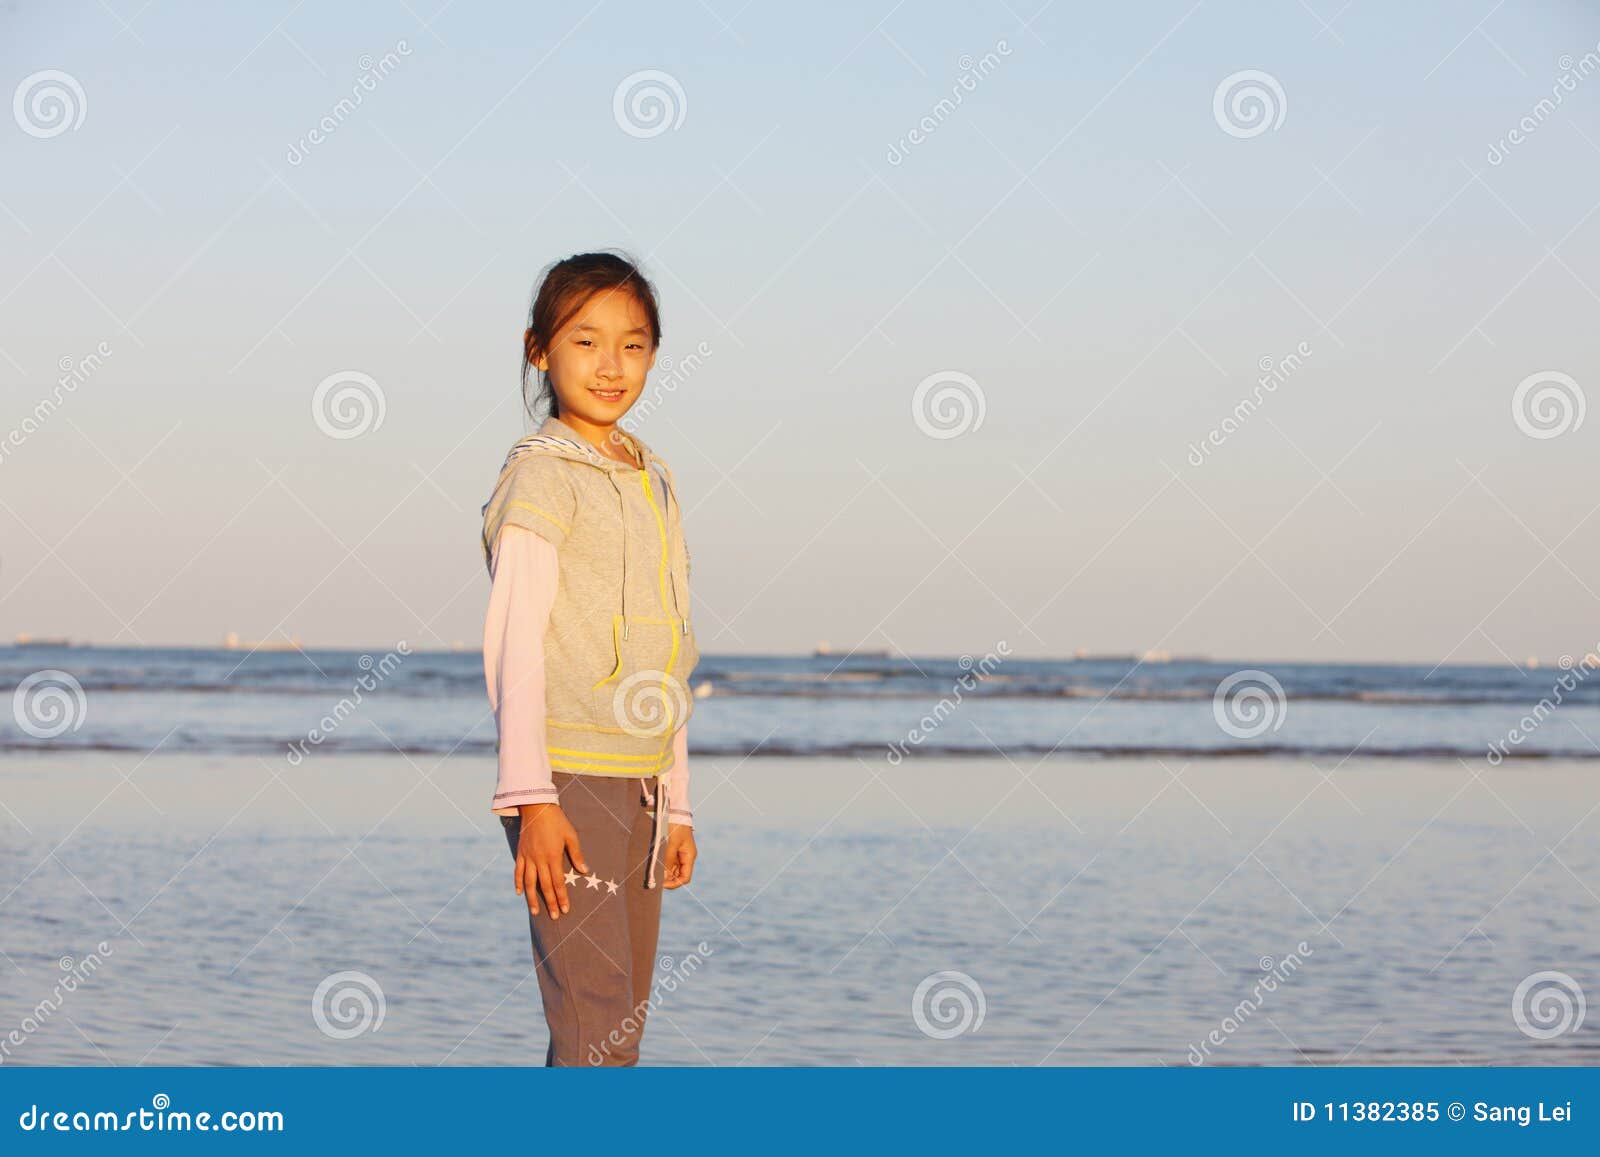 Child nearby the sea stock image. Image of leisure, childhood - 11382385